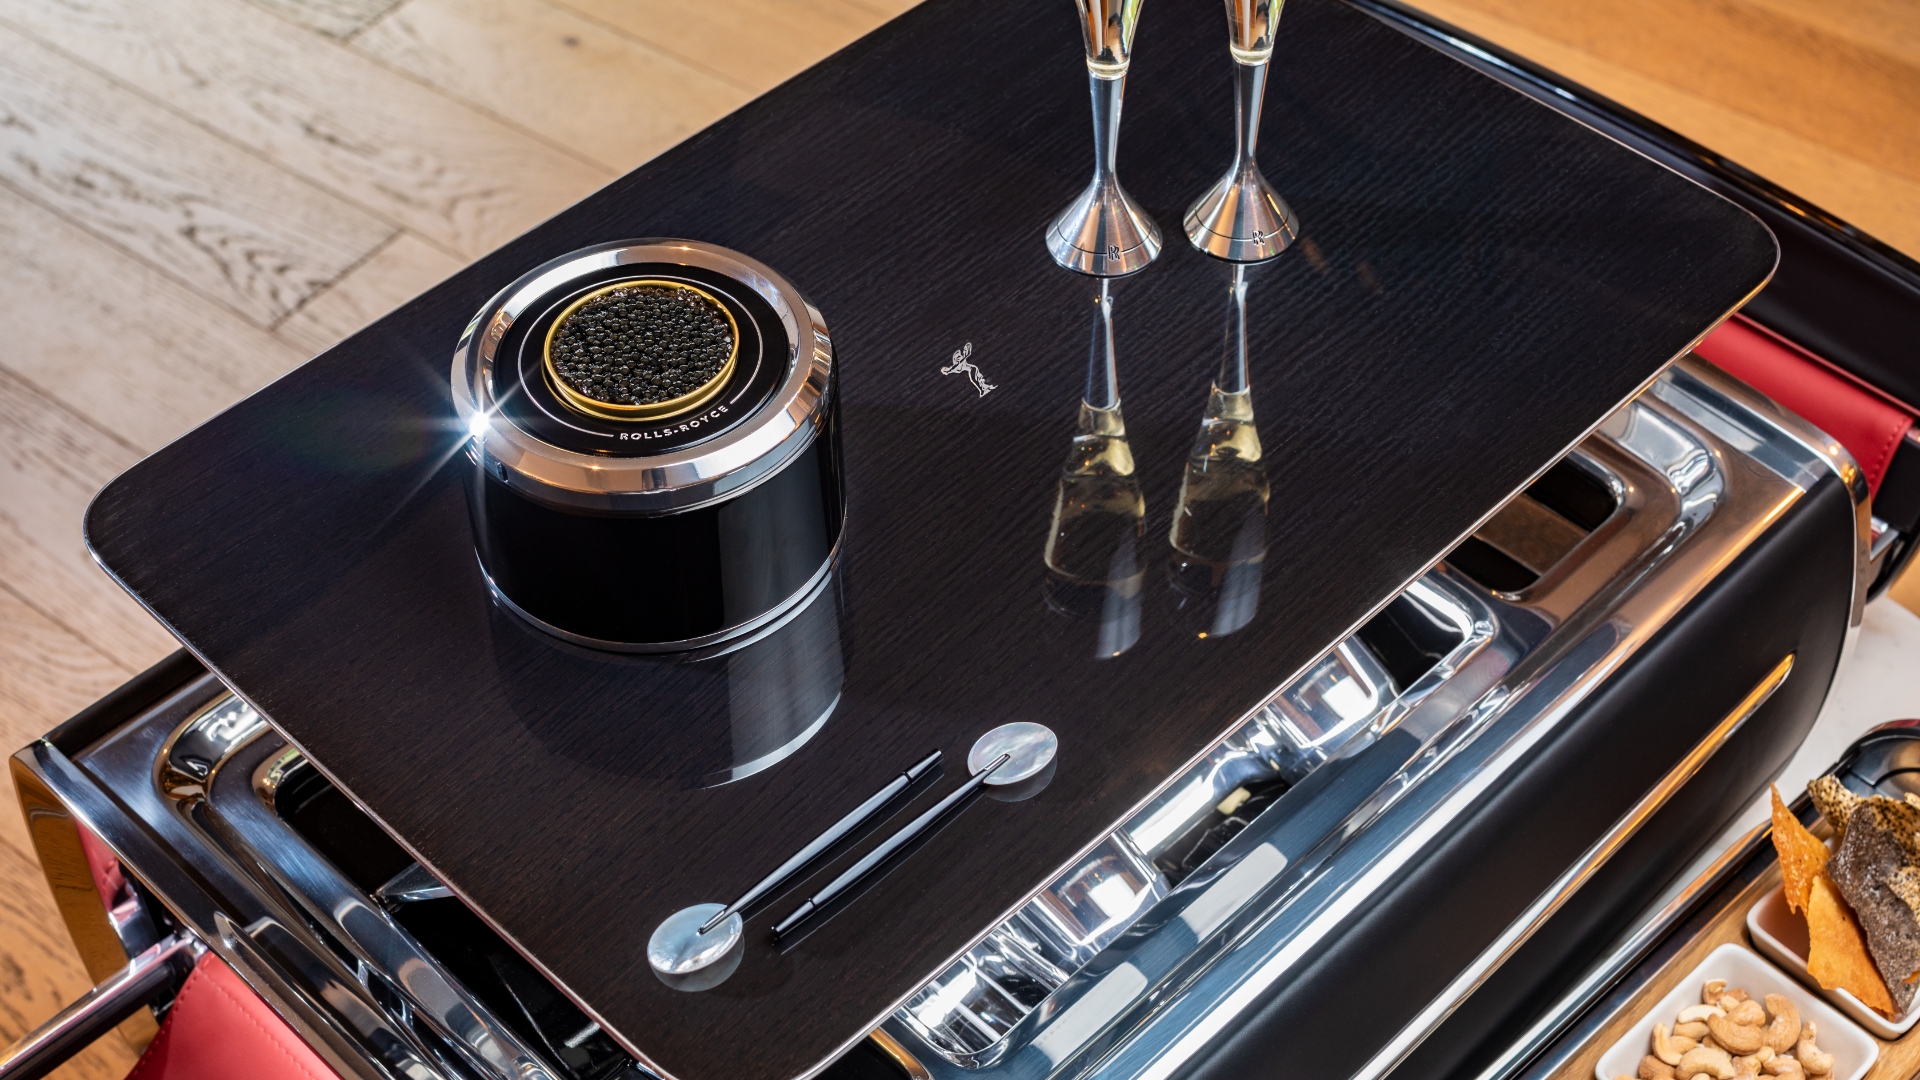 The Rolls-Royce Champagne Chest